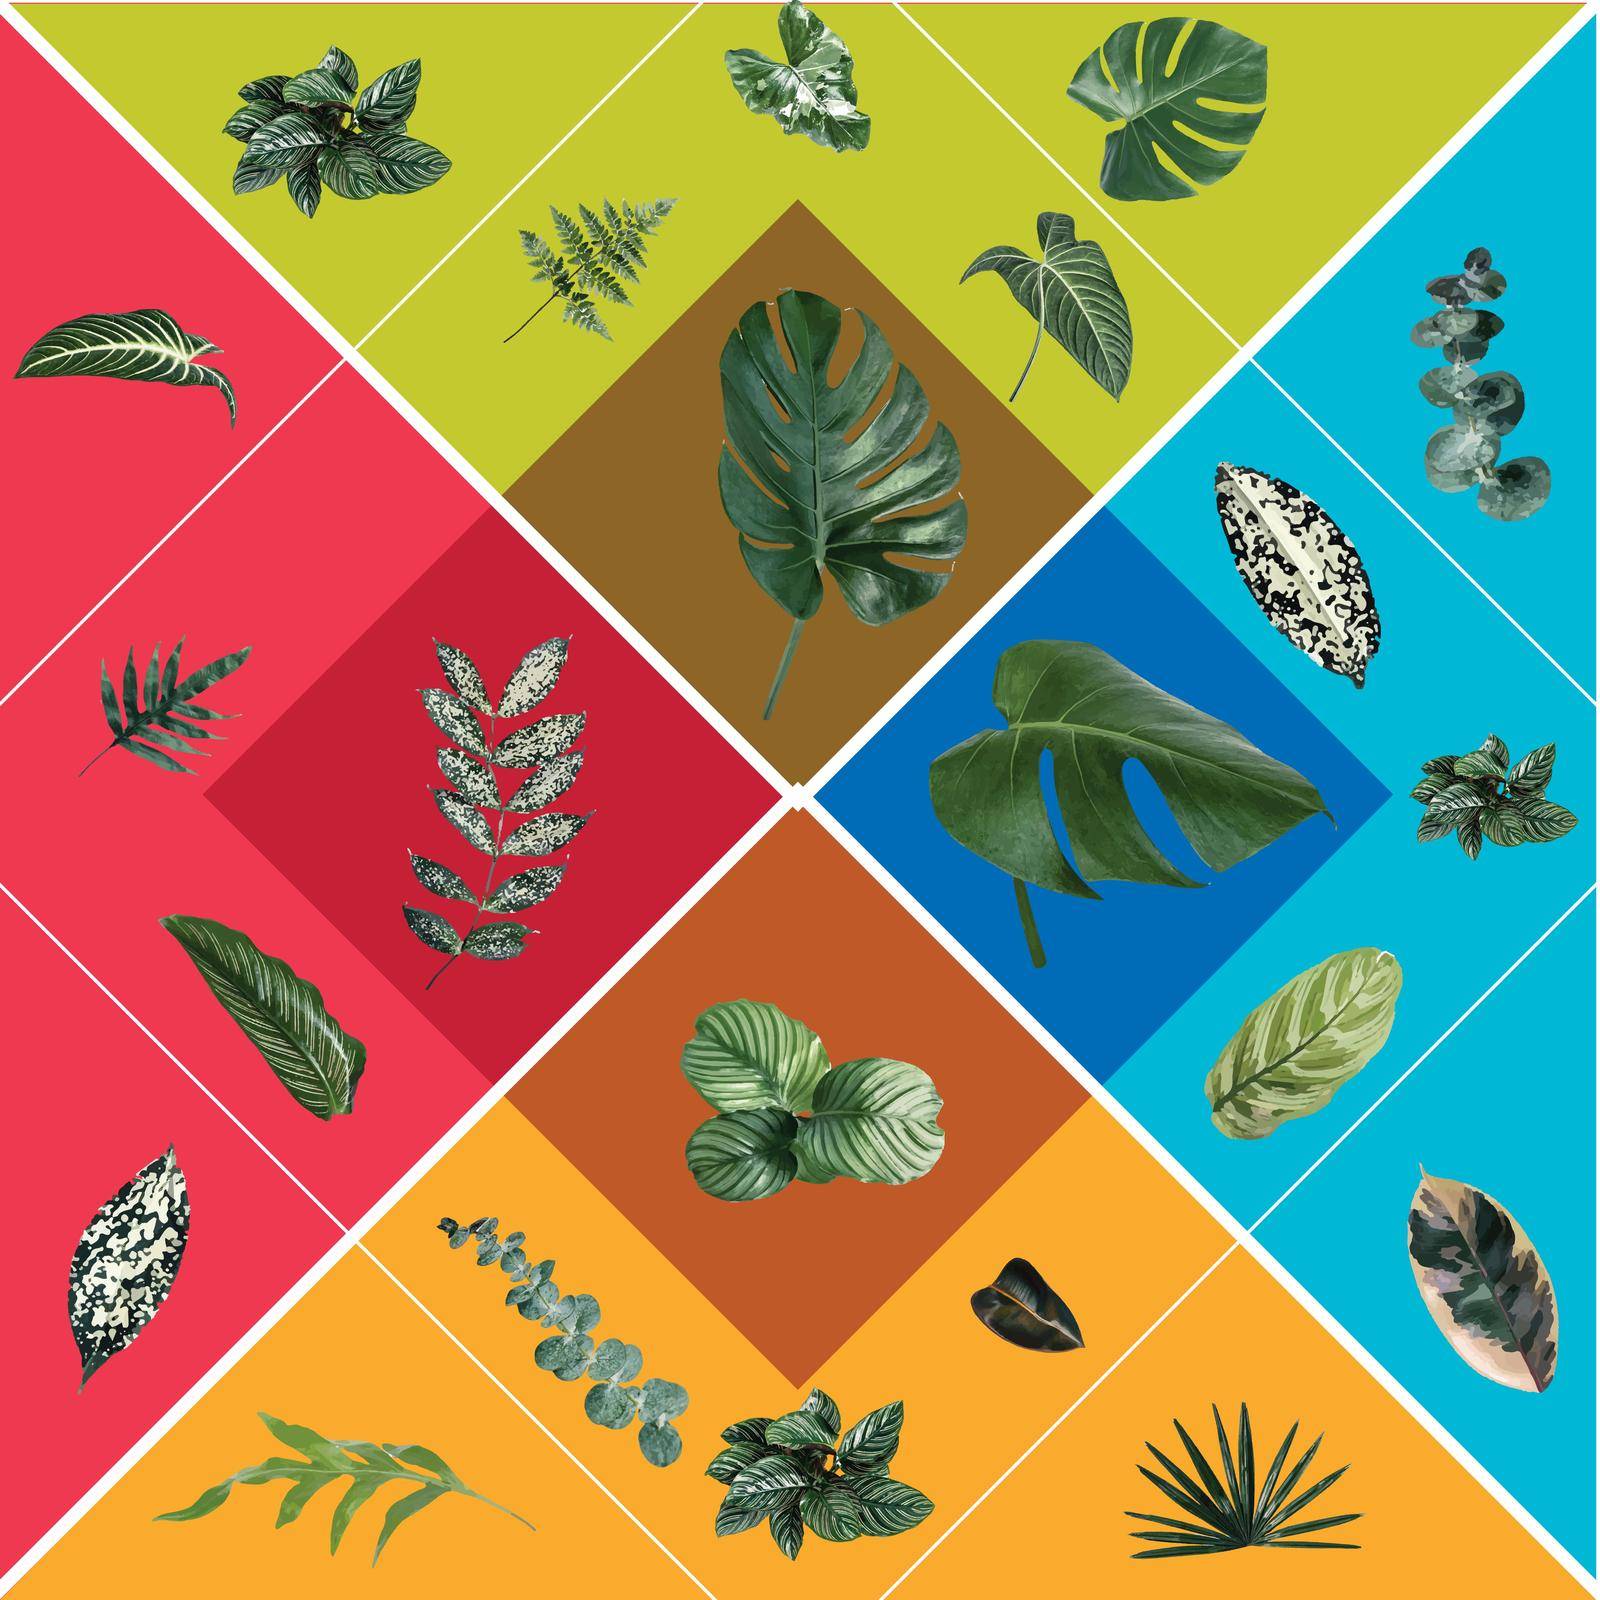 you can use gren tropical leaf design element set to design banners, posters, backgrounds, ...etc.